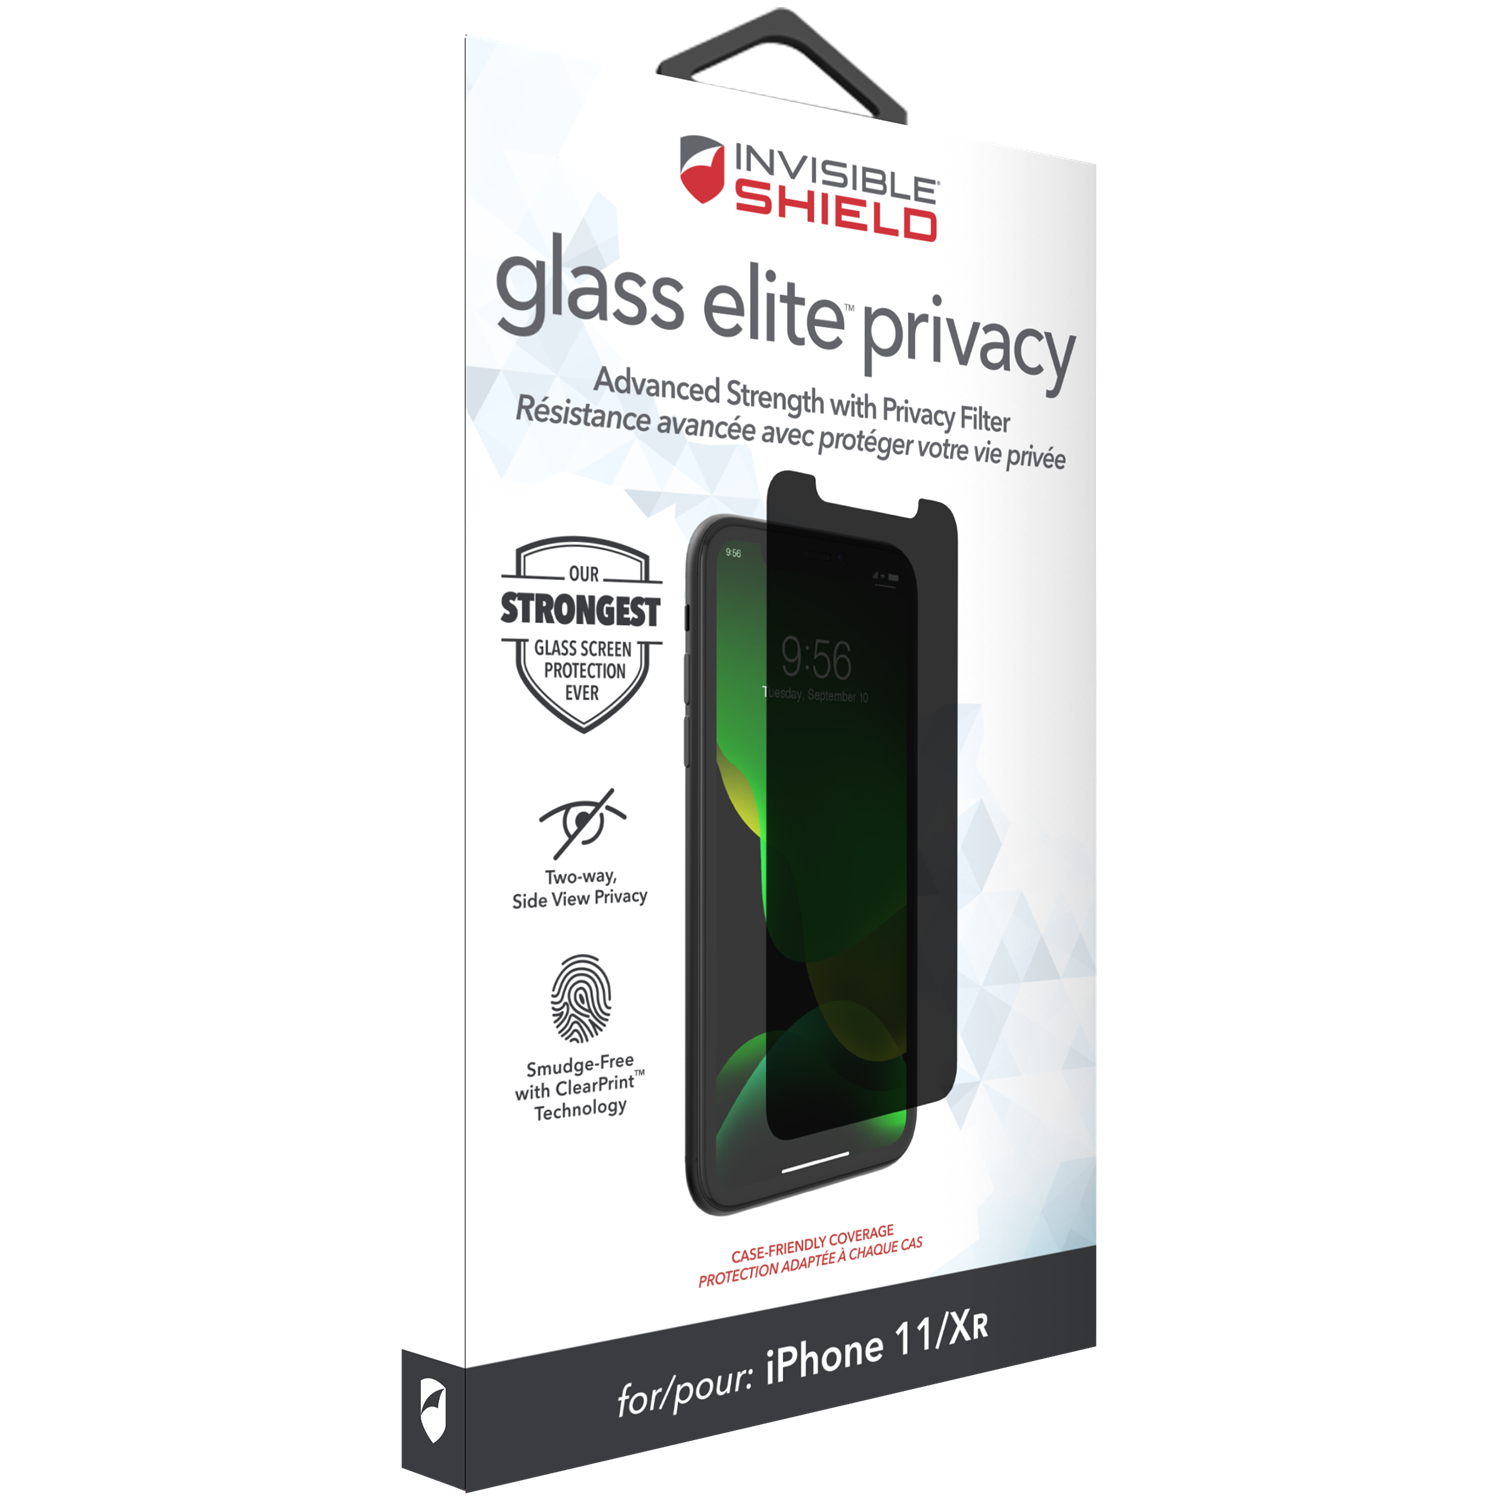 InvisibleShield Glass Elite Privacy iPhone 11/XR